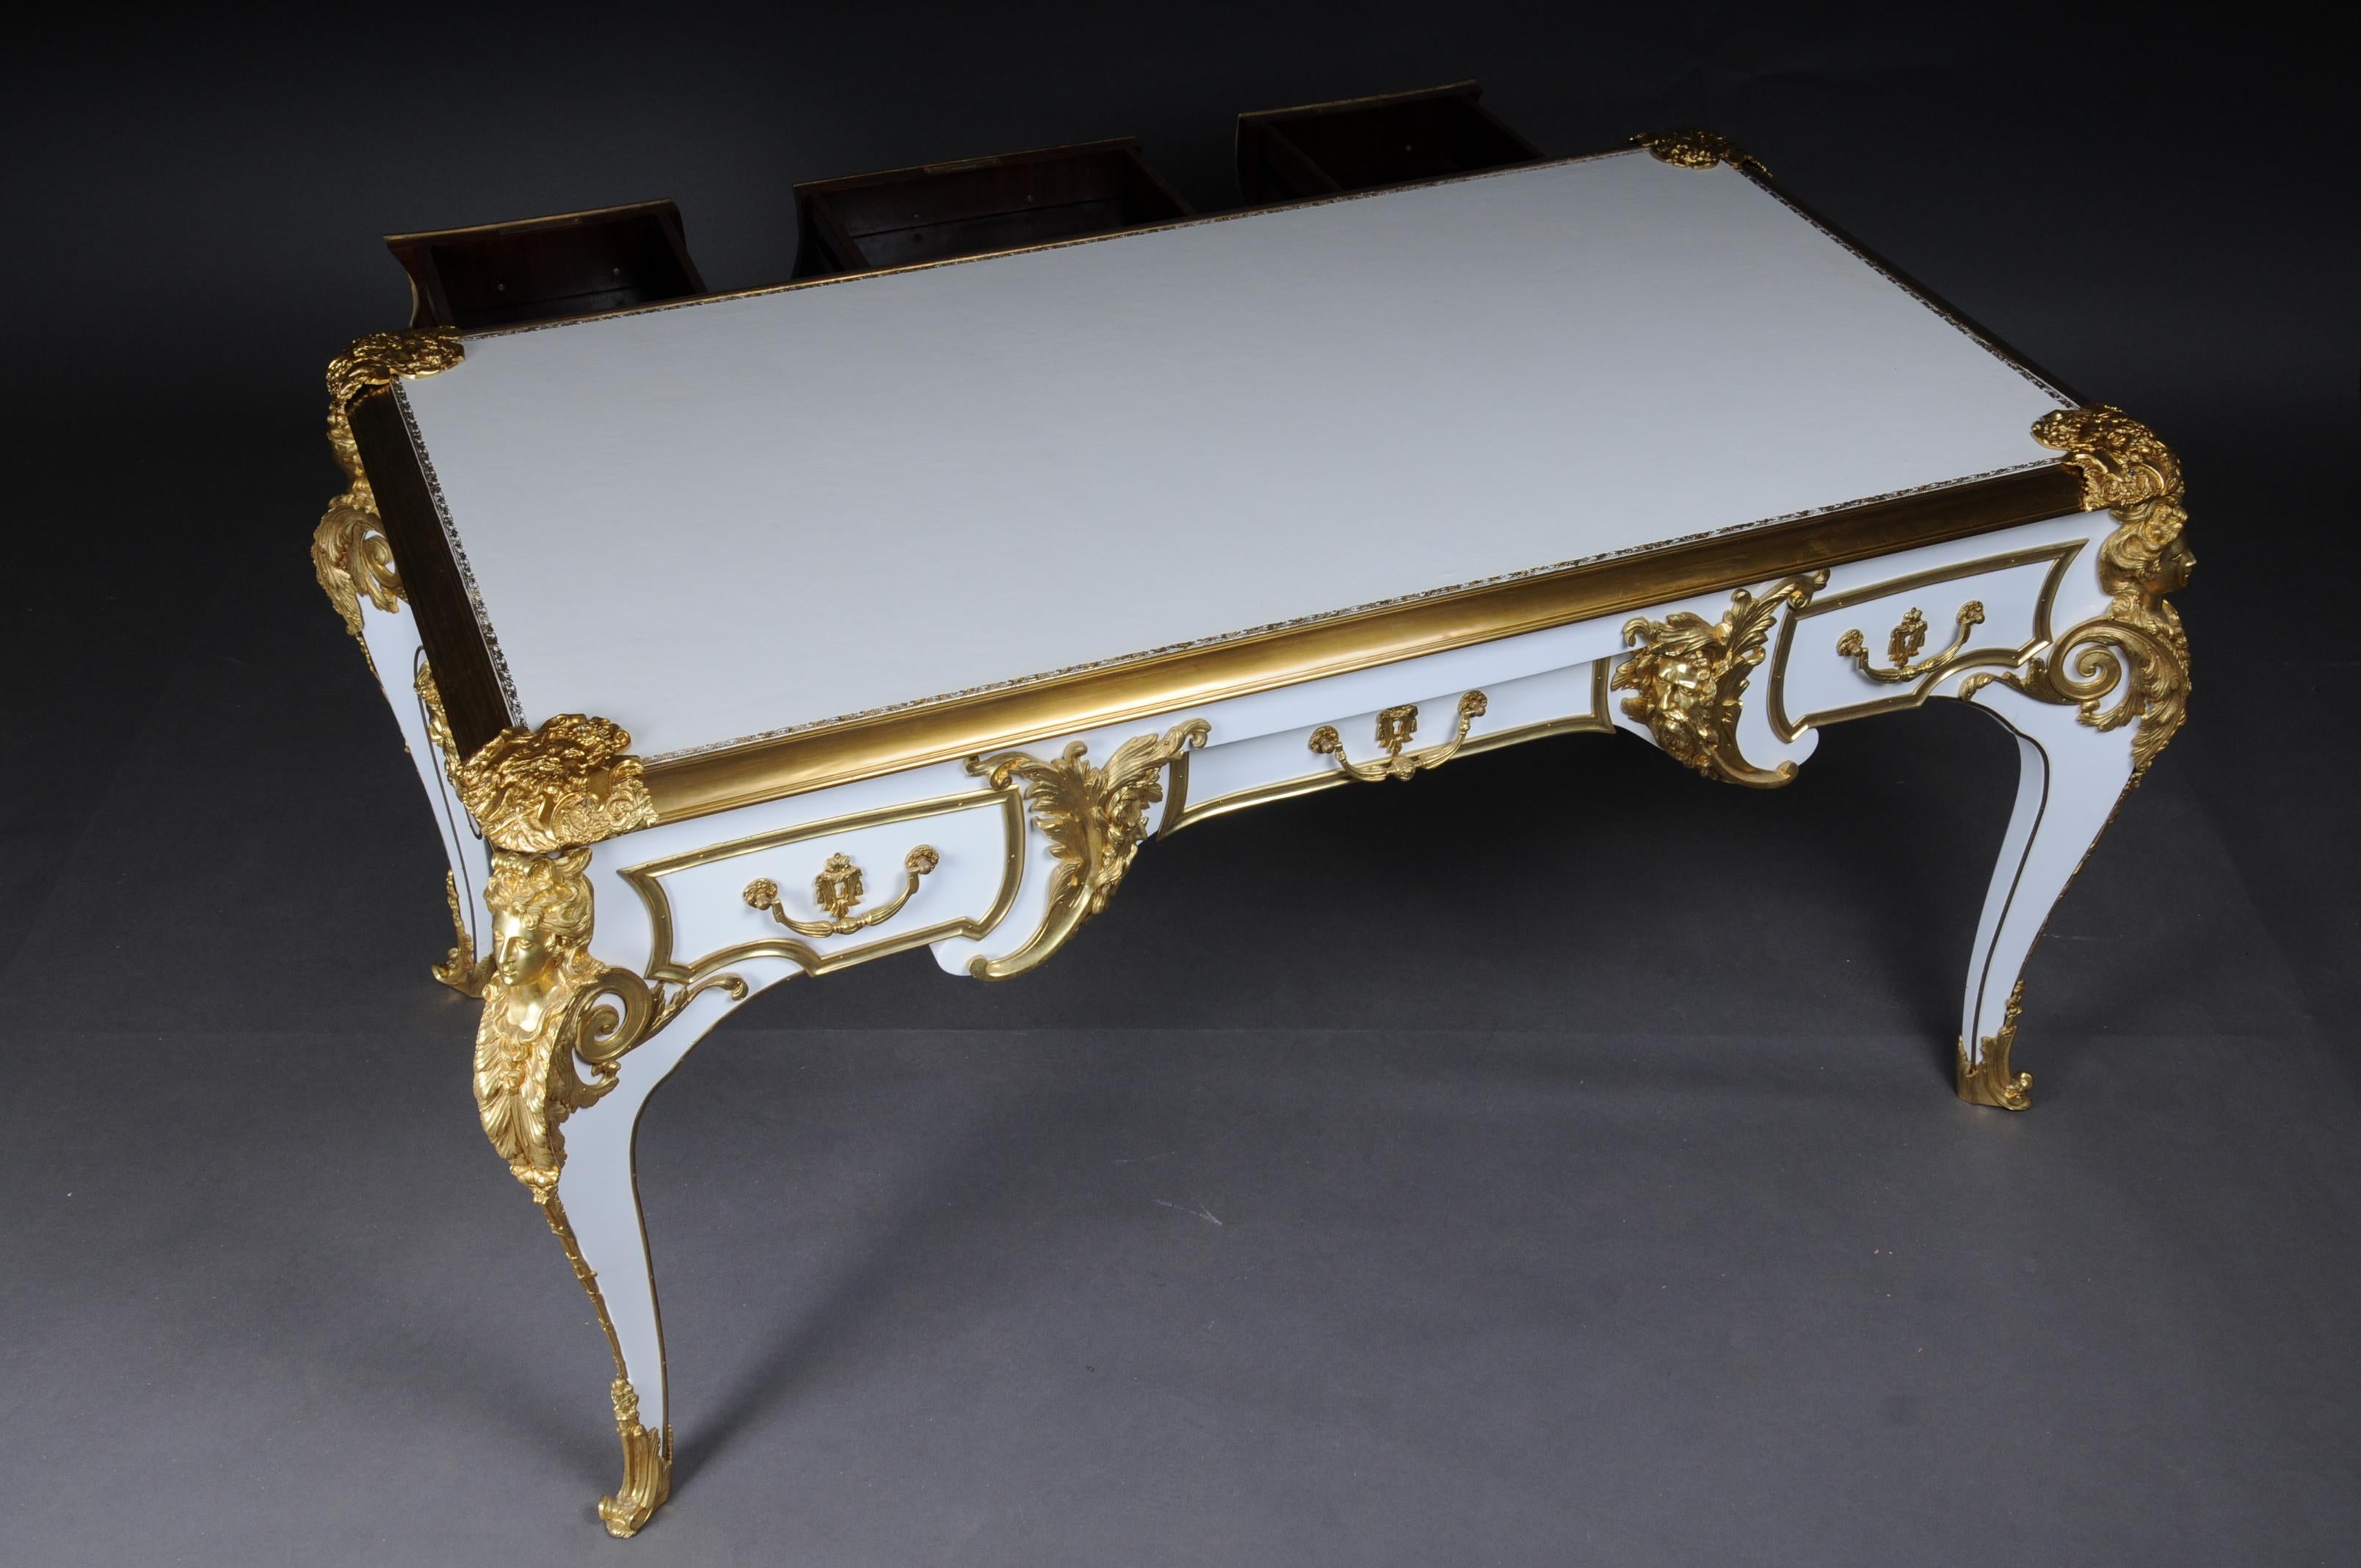 20th Century Bureau Plat/Desk high gloss white with gold after C. Boulle For Sale 10